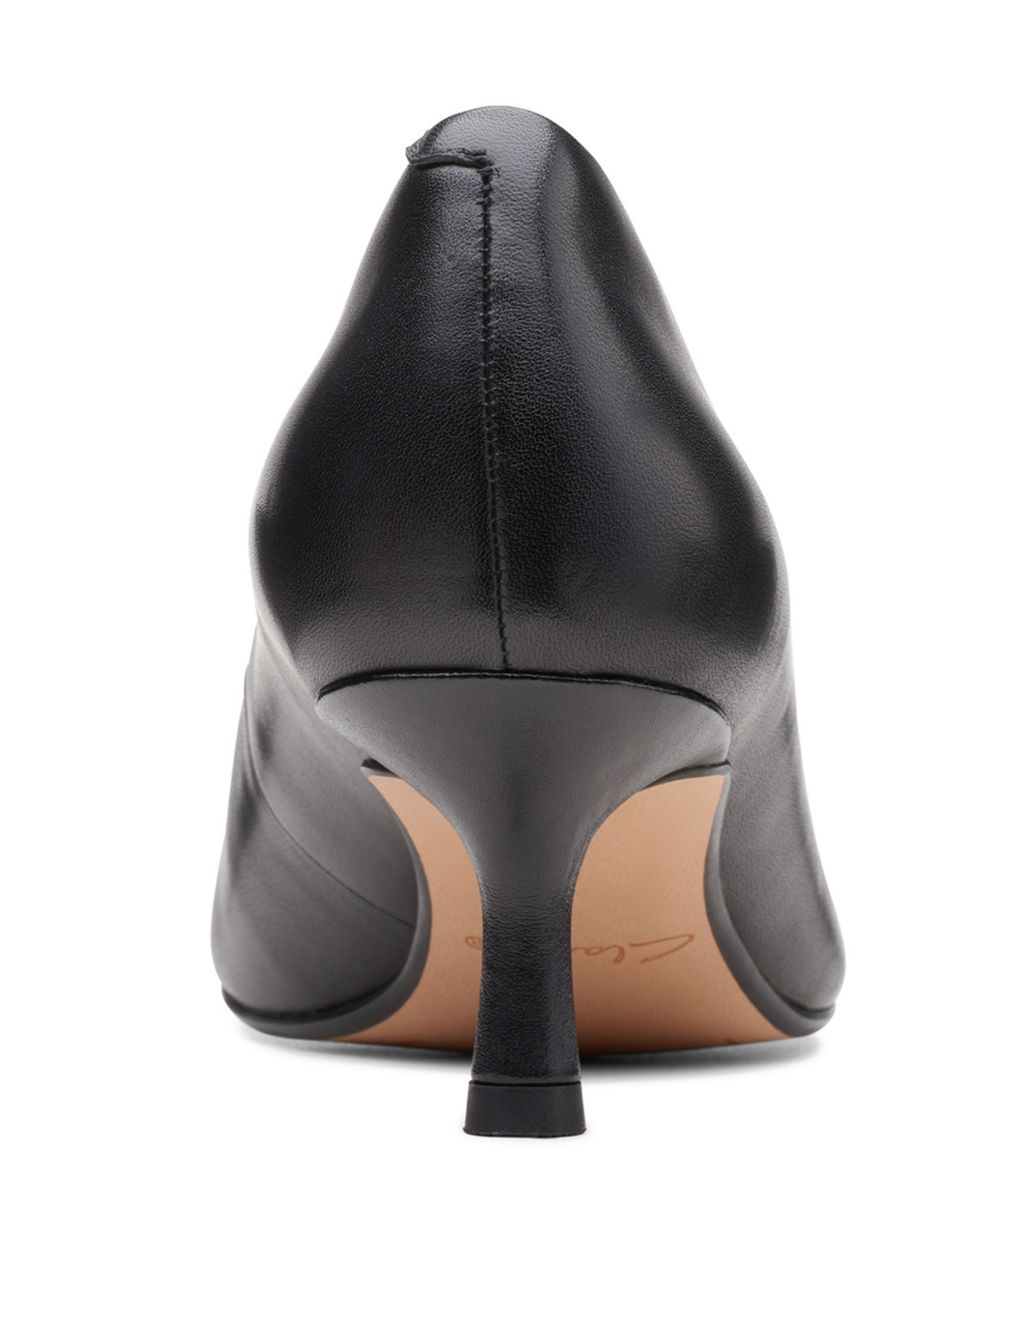 Leather Kitten Heel Court Shoes image 7